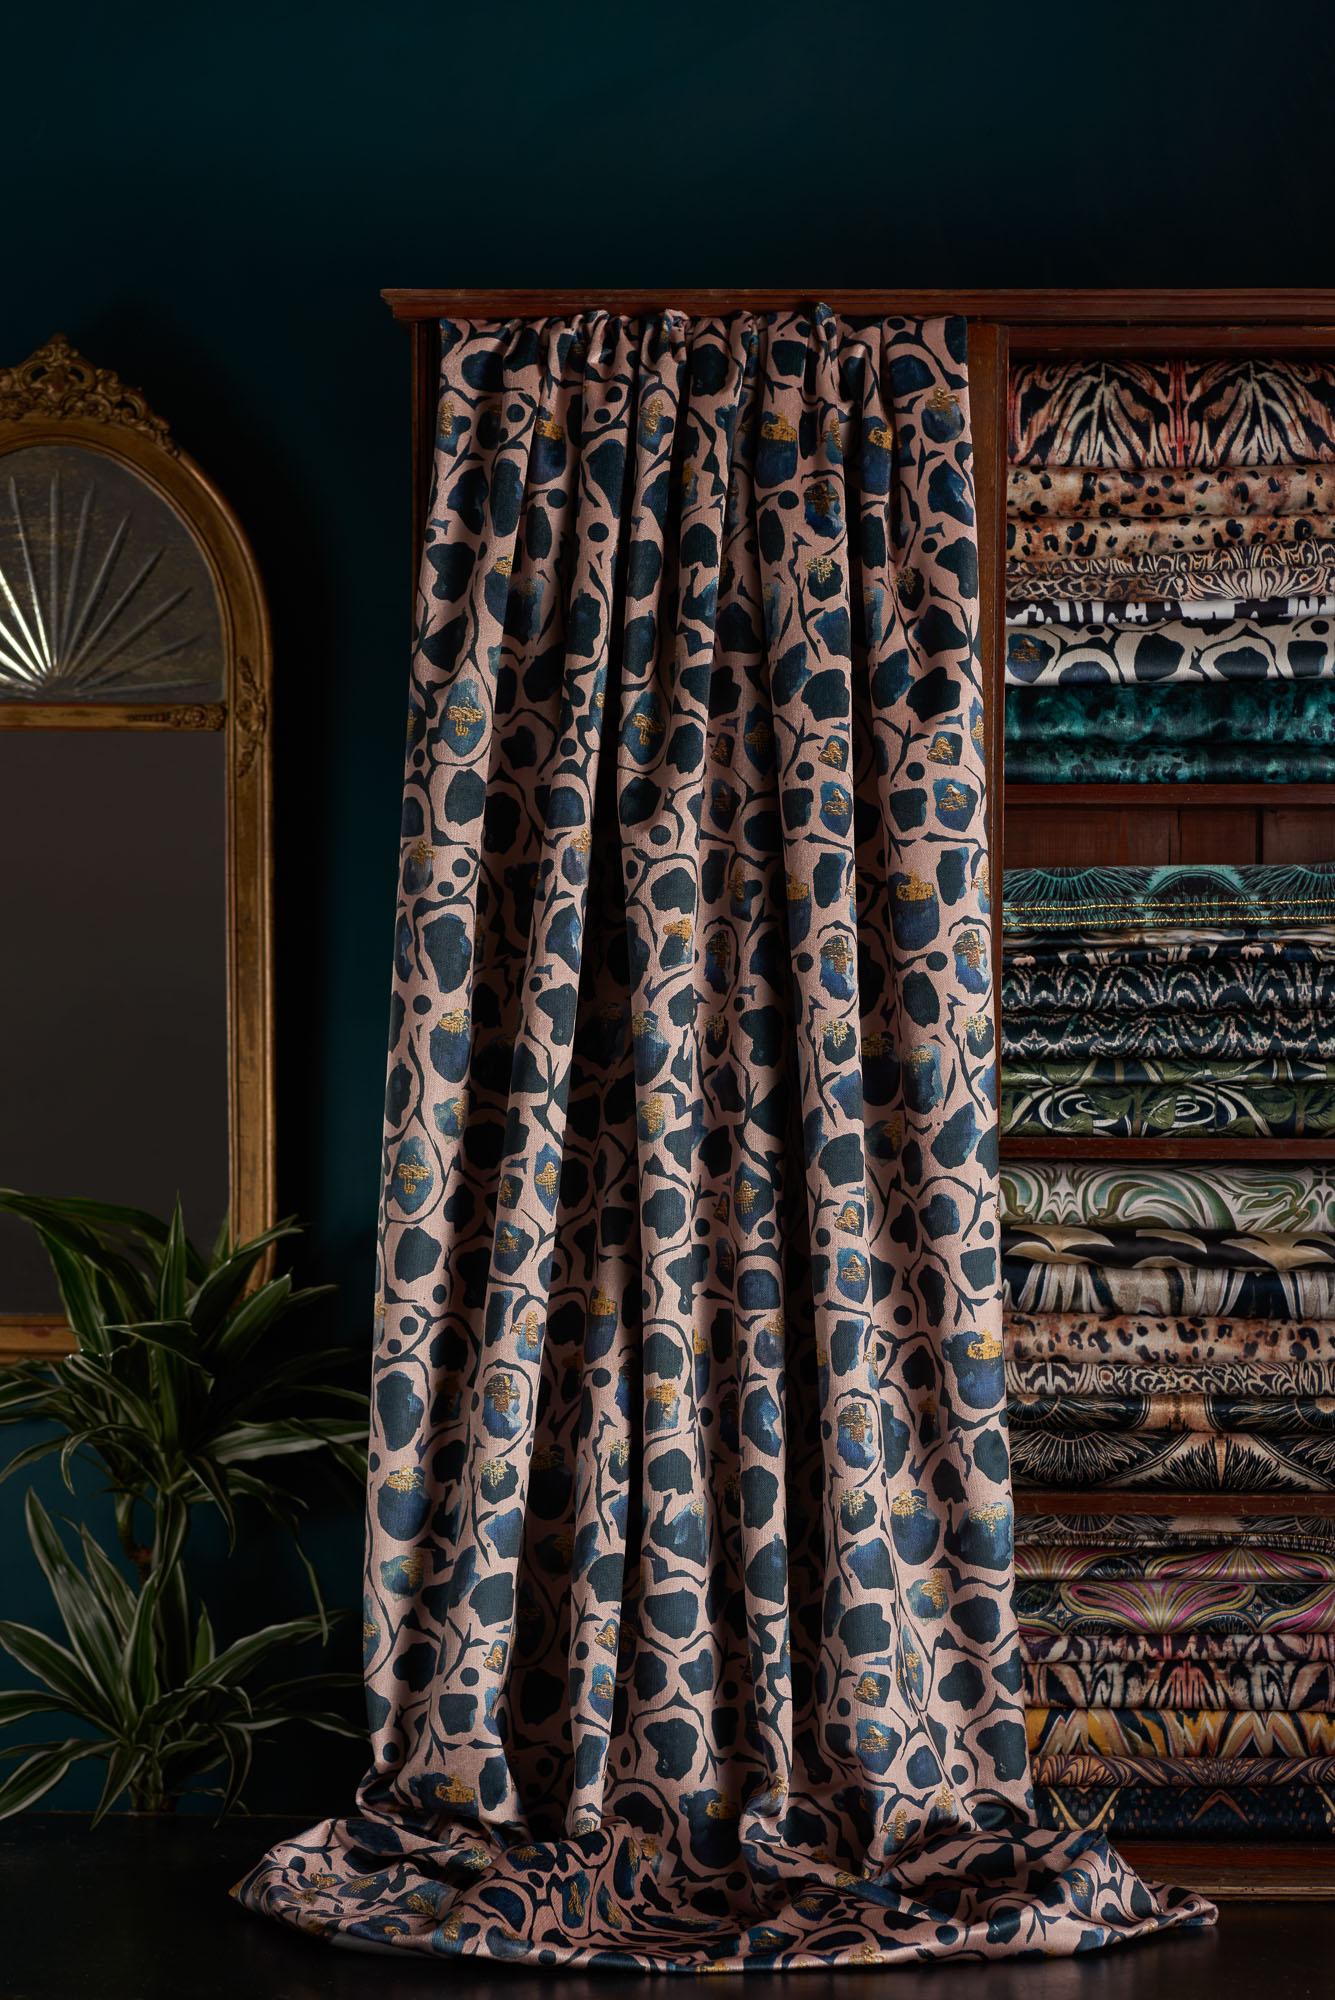 Giraffe Blush is our fun animal print with gold accents in four distinctive colourways. Created from an ink painting Anna added gold touches to these deep inky blue tones with a blush pink background.

This velvet is midweight, with a strong